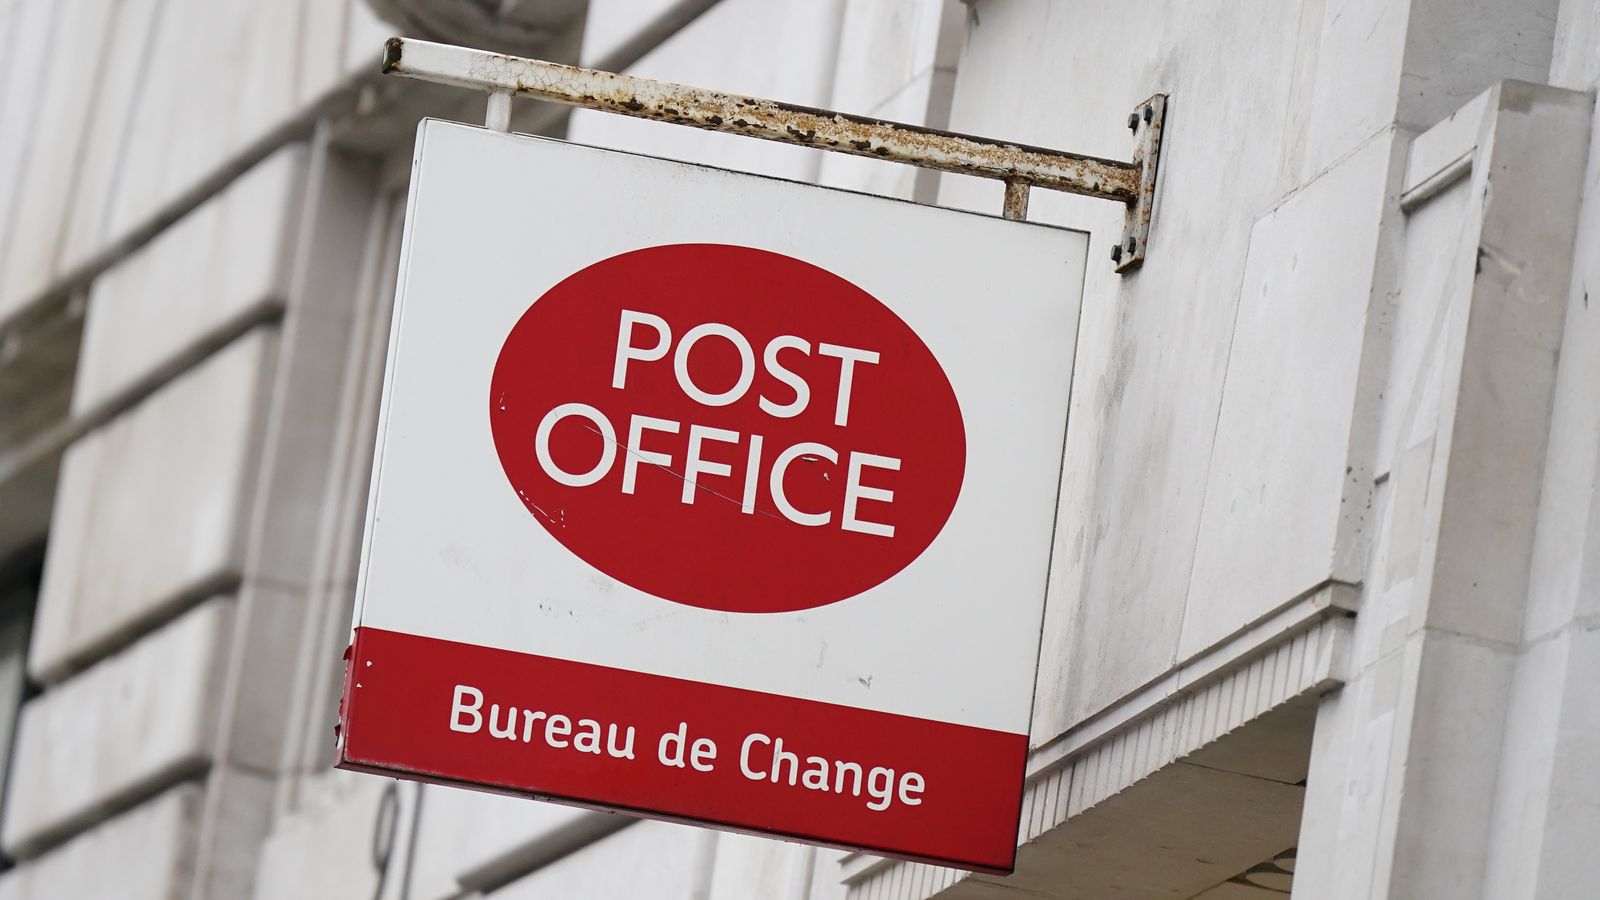 Post Office to be removed from Horizon compensation process, minister says